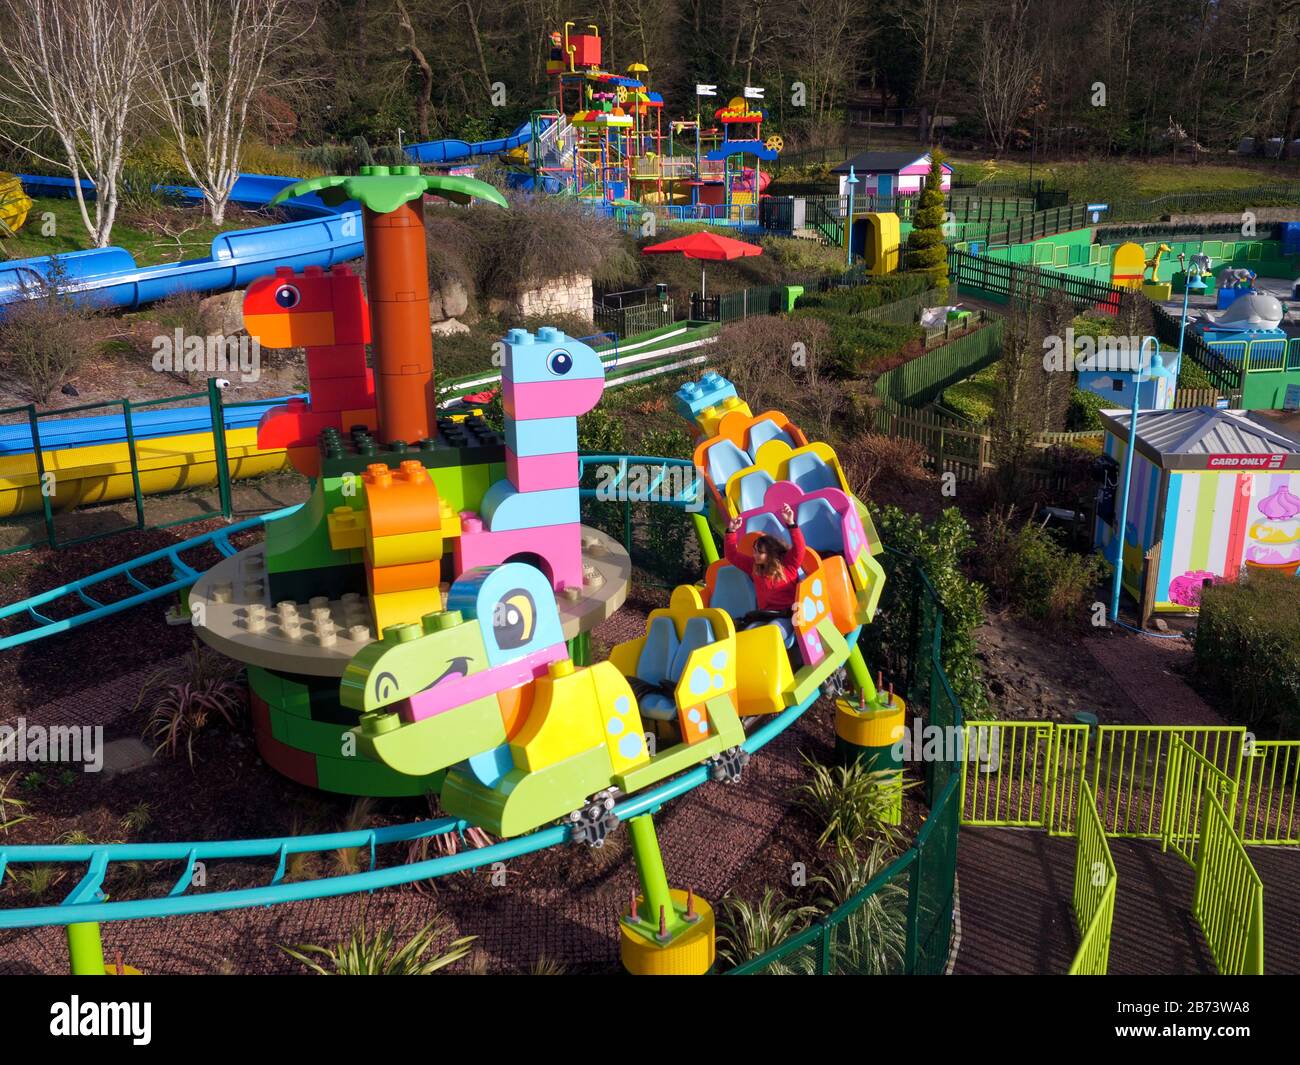 Creative lead Rosie Brailsford tests the world's first DUPLO Dino coaster at LEGOLAND Windsor Resort, Berkshire, as part of a makeover of the bigger and better DUPLO Valley land which opens to the public on Saturday 14 March. Stock Photo